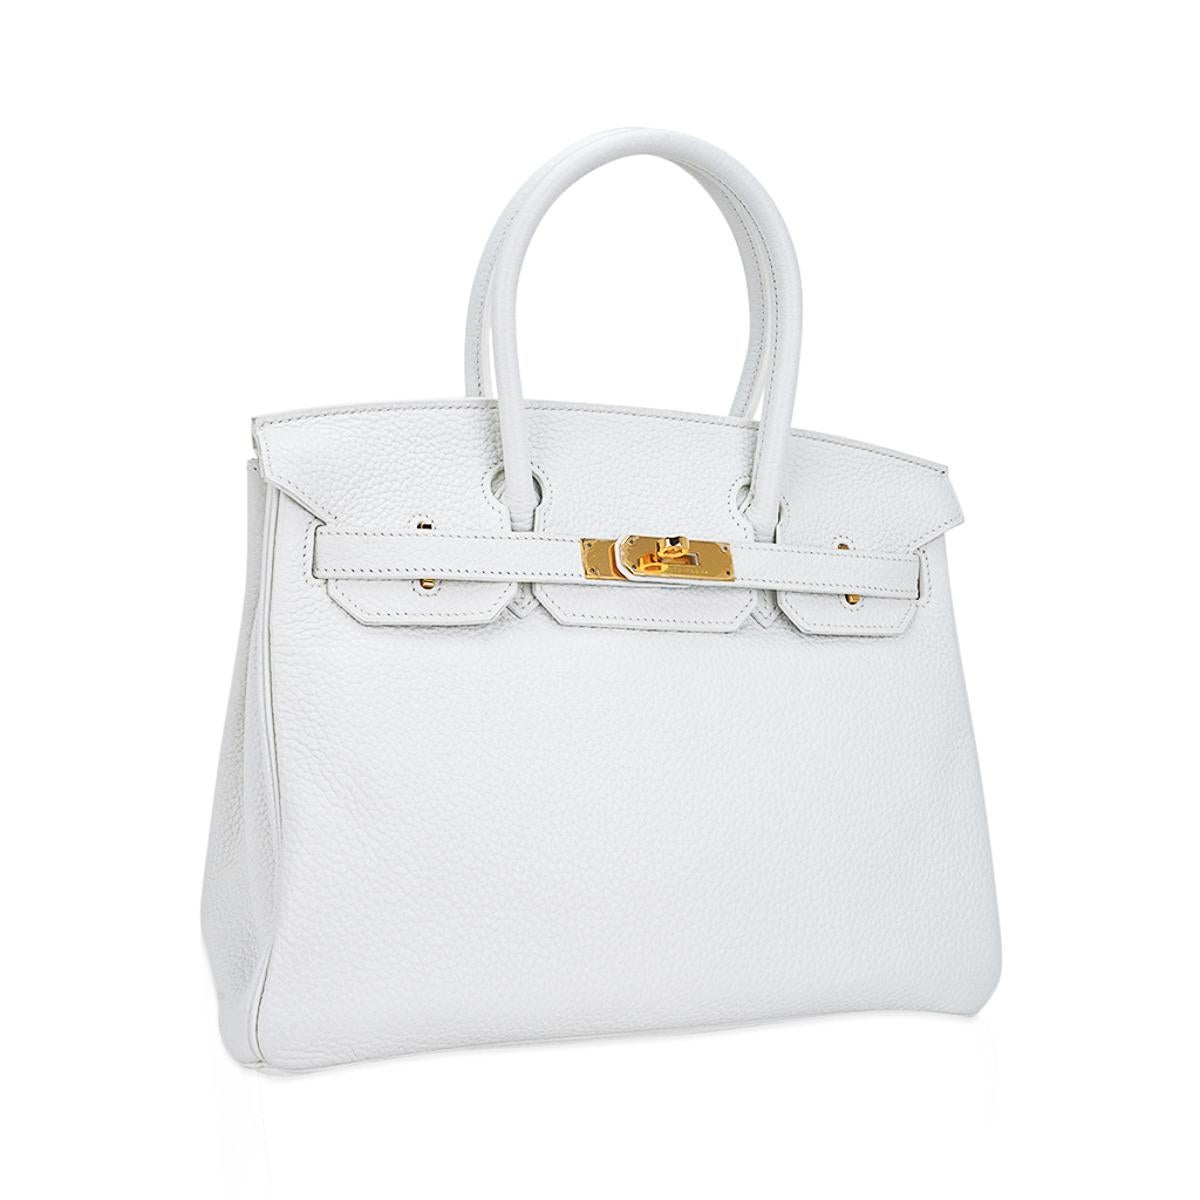 Mightychic offers an Hermes Birkin 30 bag featured in coveted White.
The most rare of all Hermes leather colours.
Accentuated with gold hardware.
This snow white Hermes Birkin bag is in clemence leather.
Never worn, there is one small light mark on